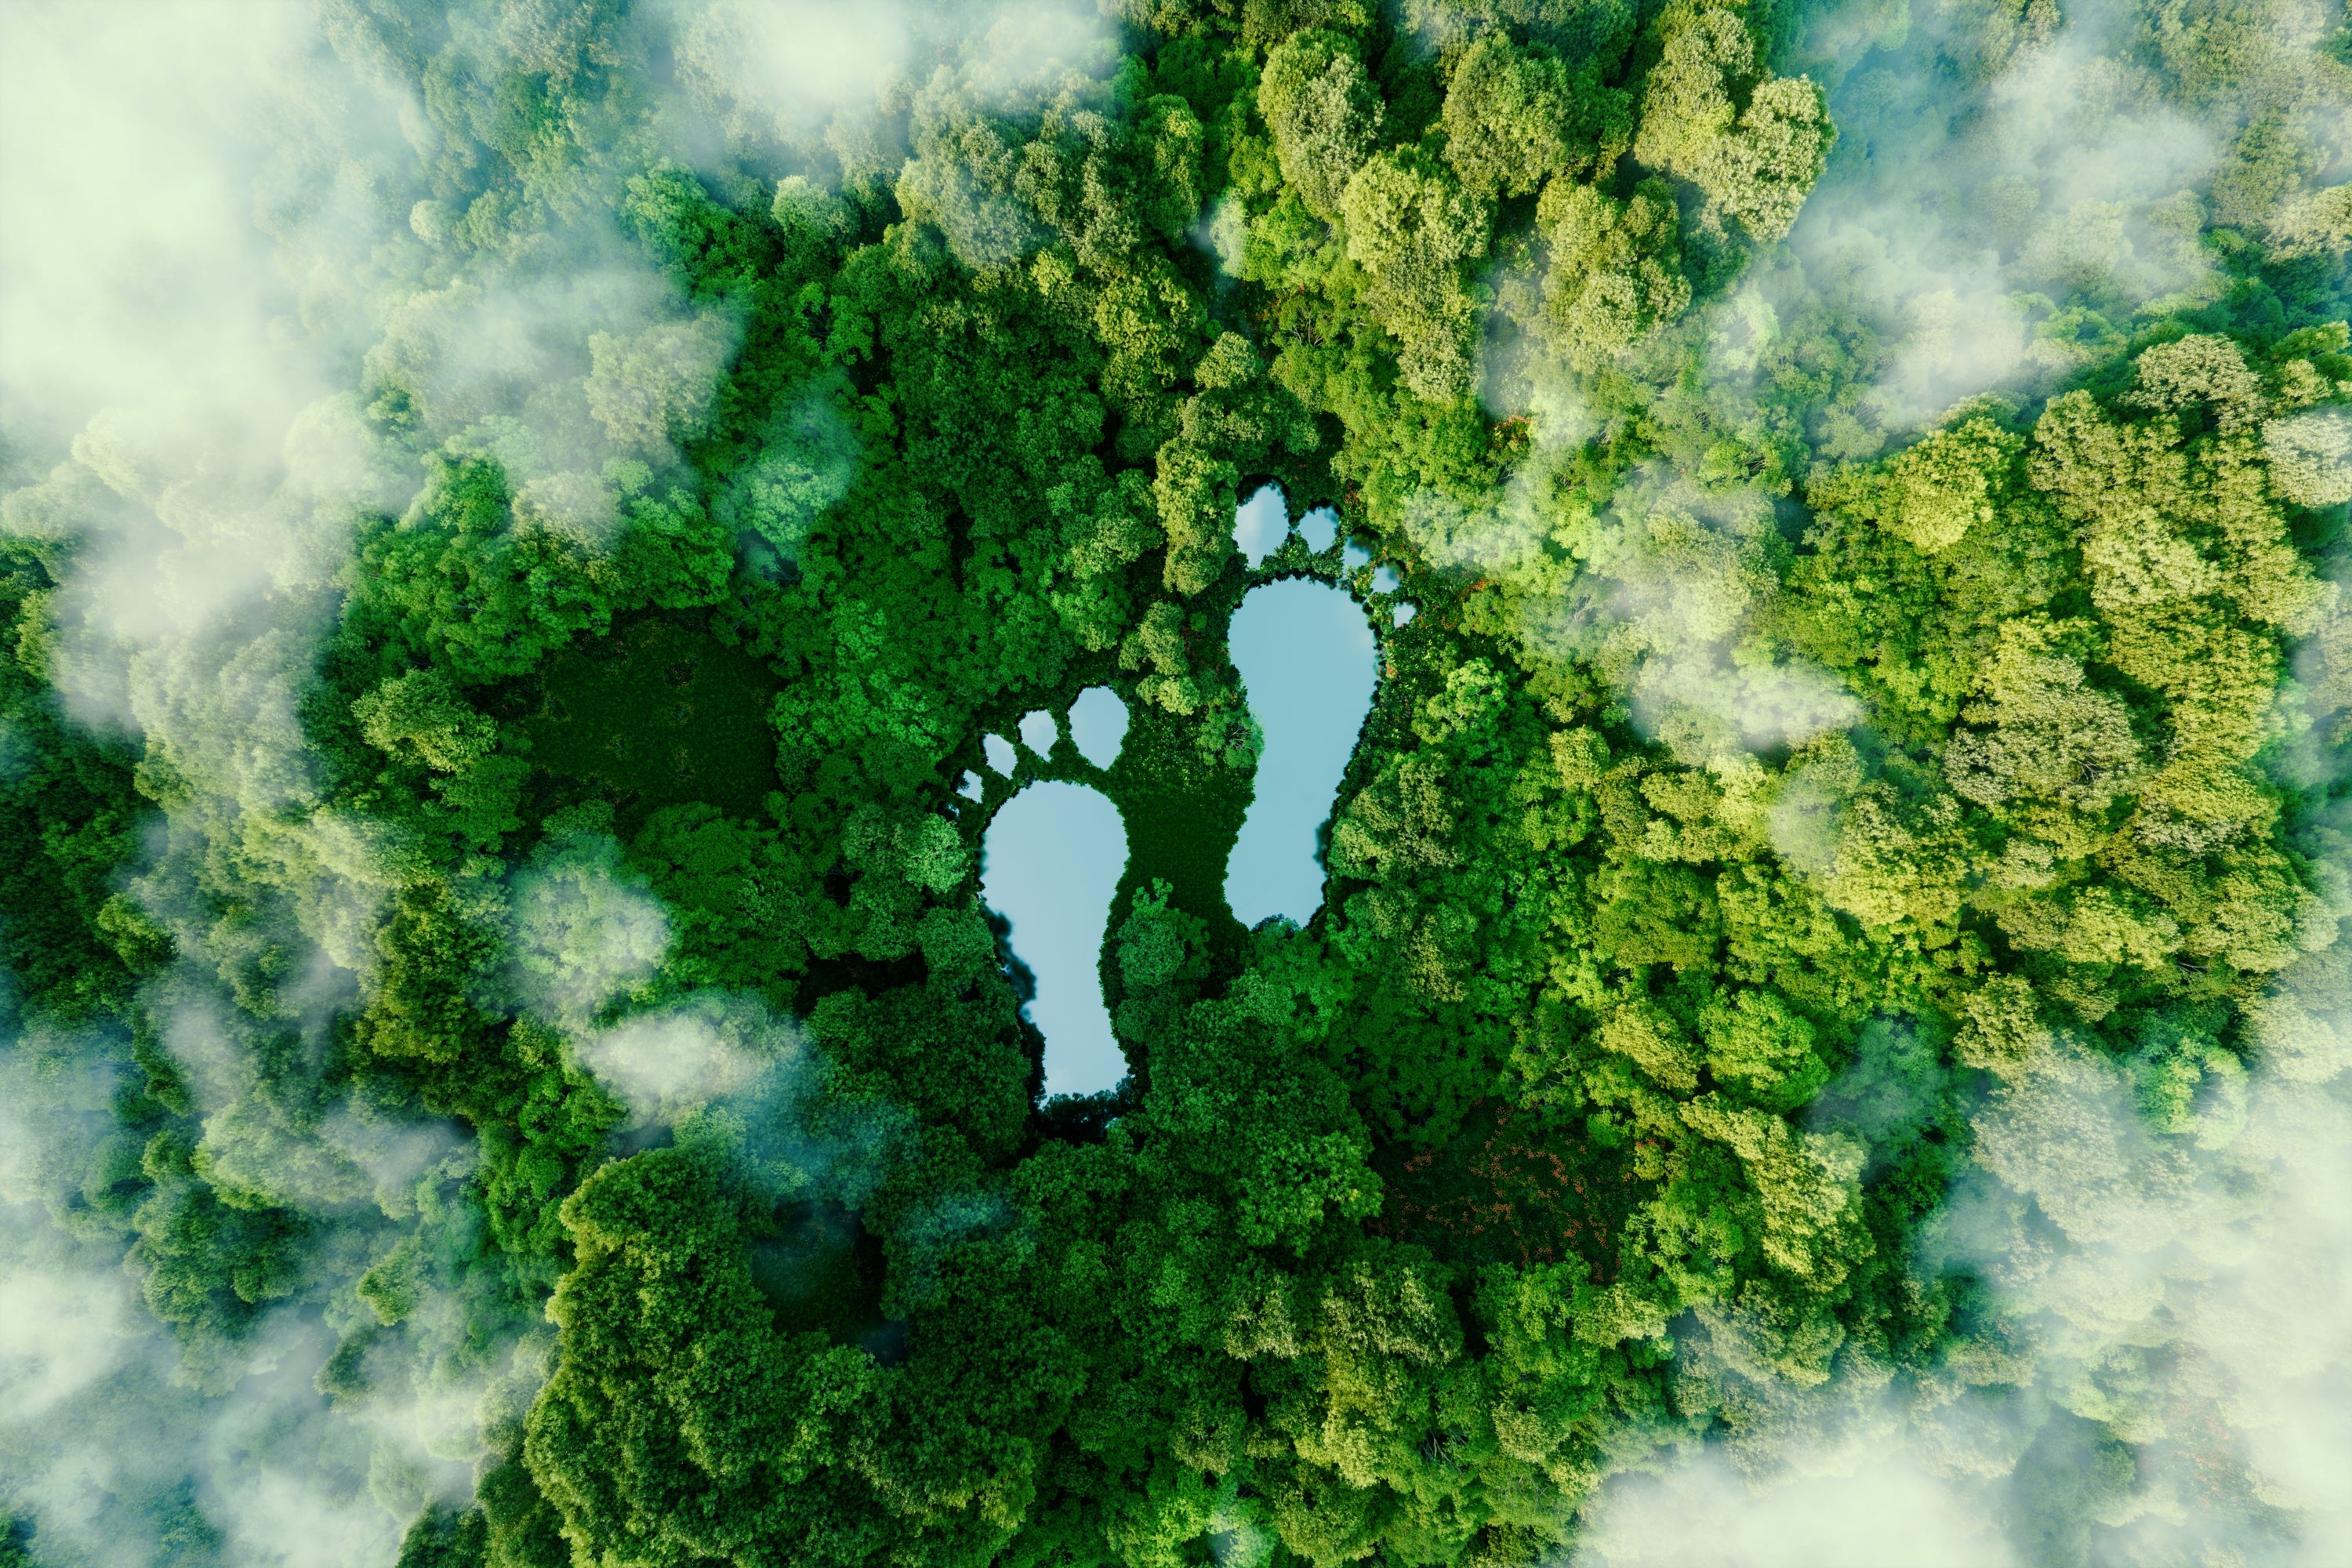 Footprints in the rainforest